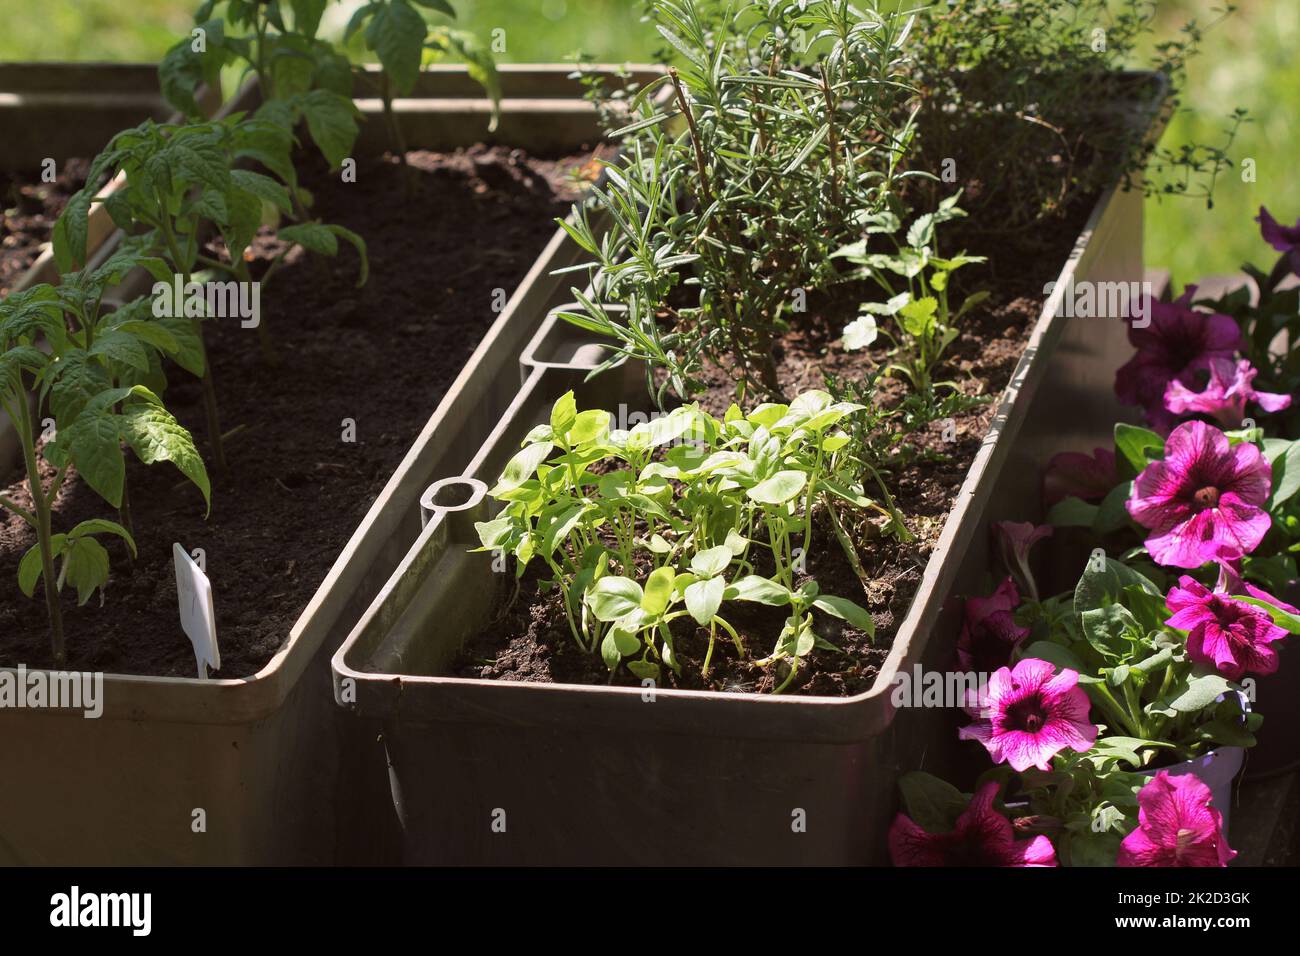 Container vegetables gardening. Vegetable garden on a terrace. Herbs, tomatoes seedling growing in container . Flower petunia in pots Stock Photo